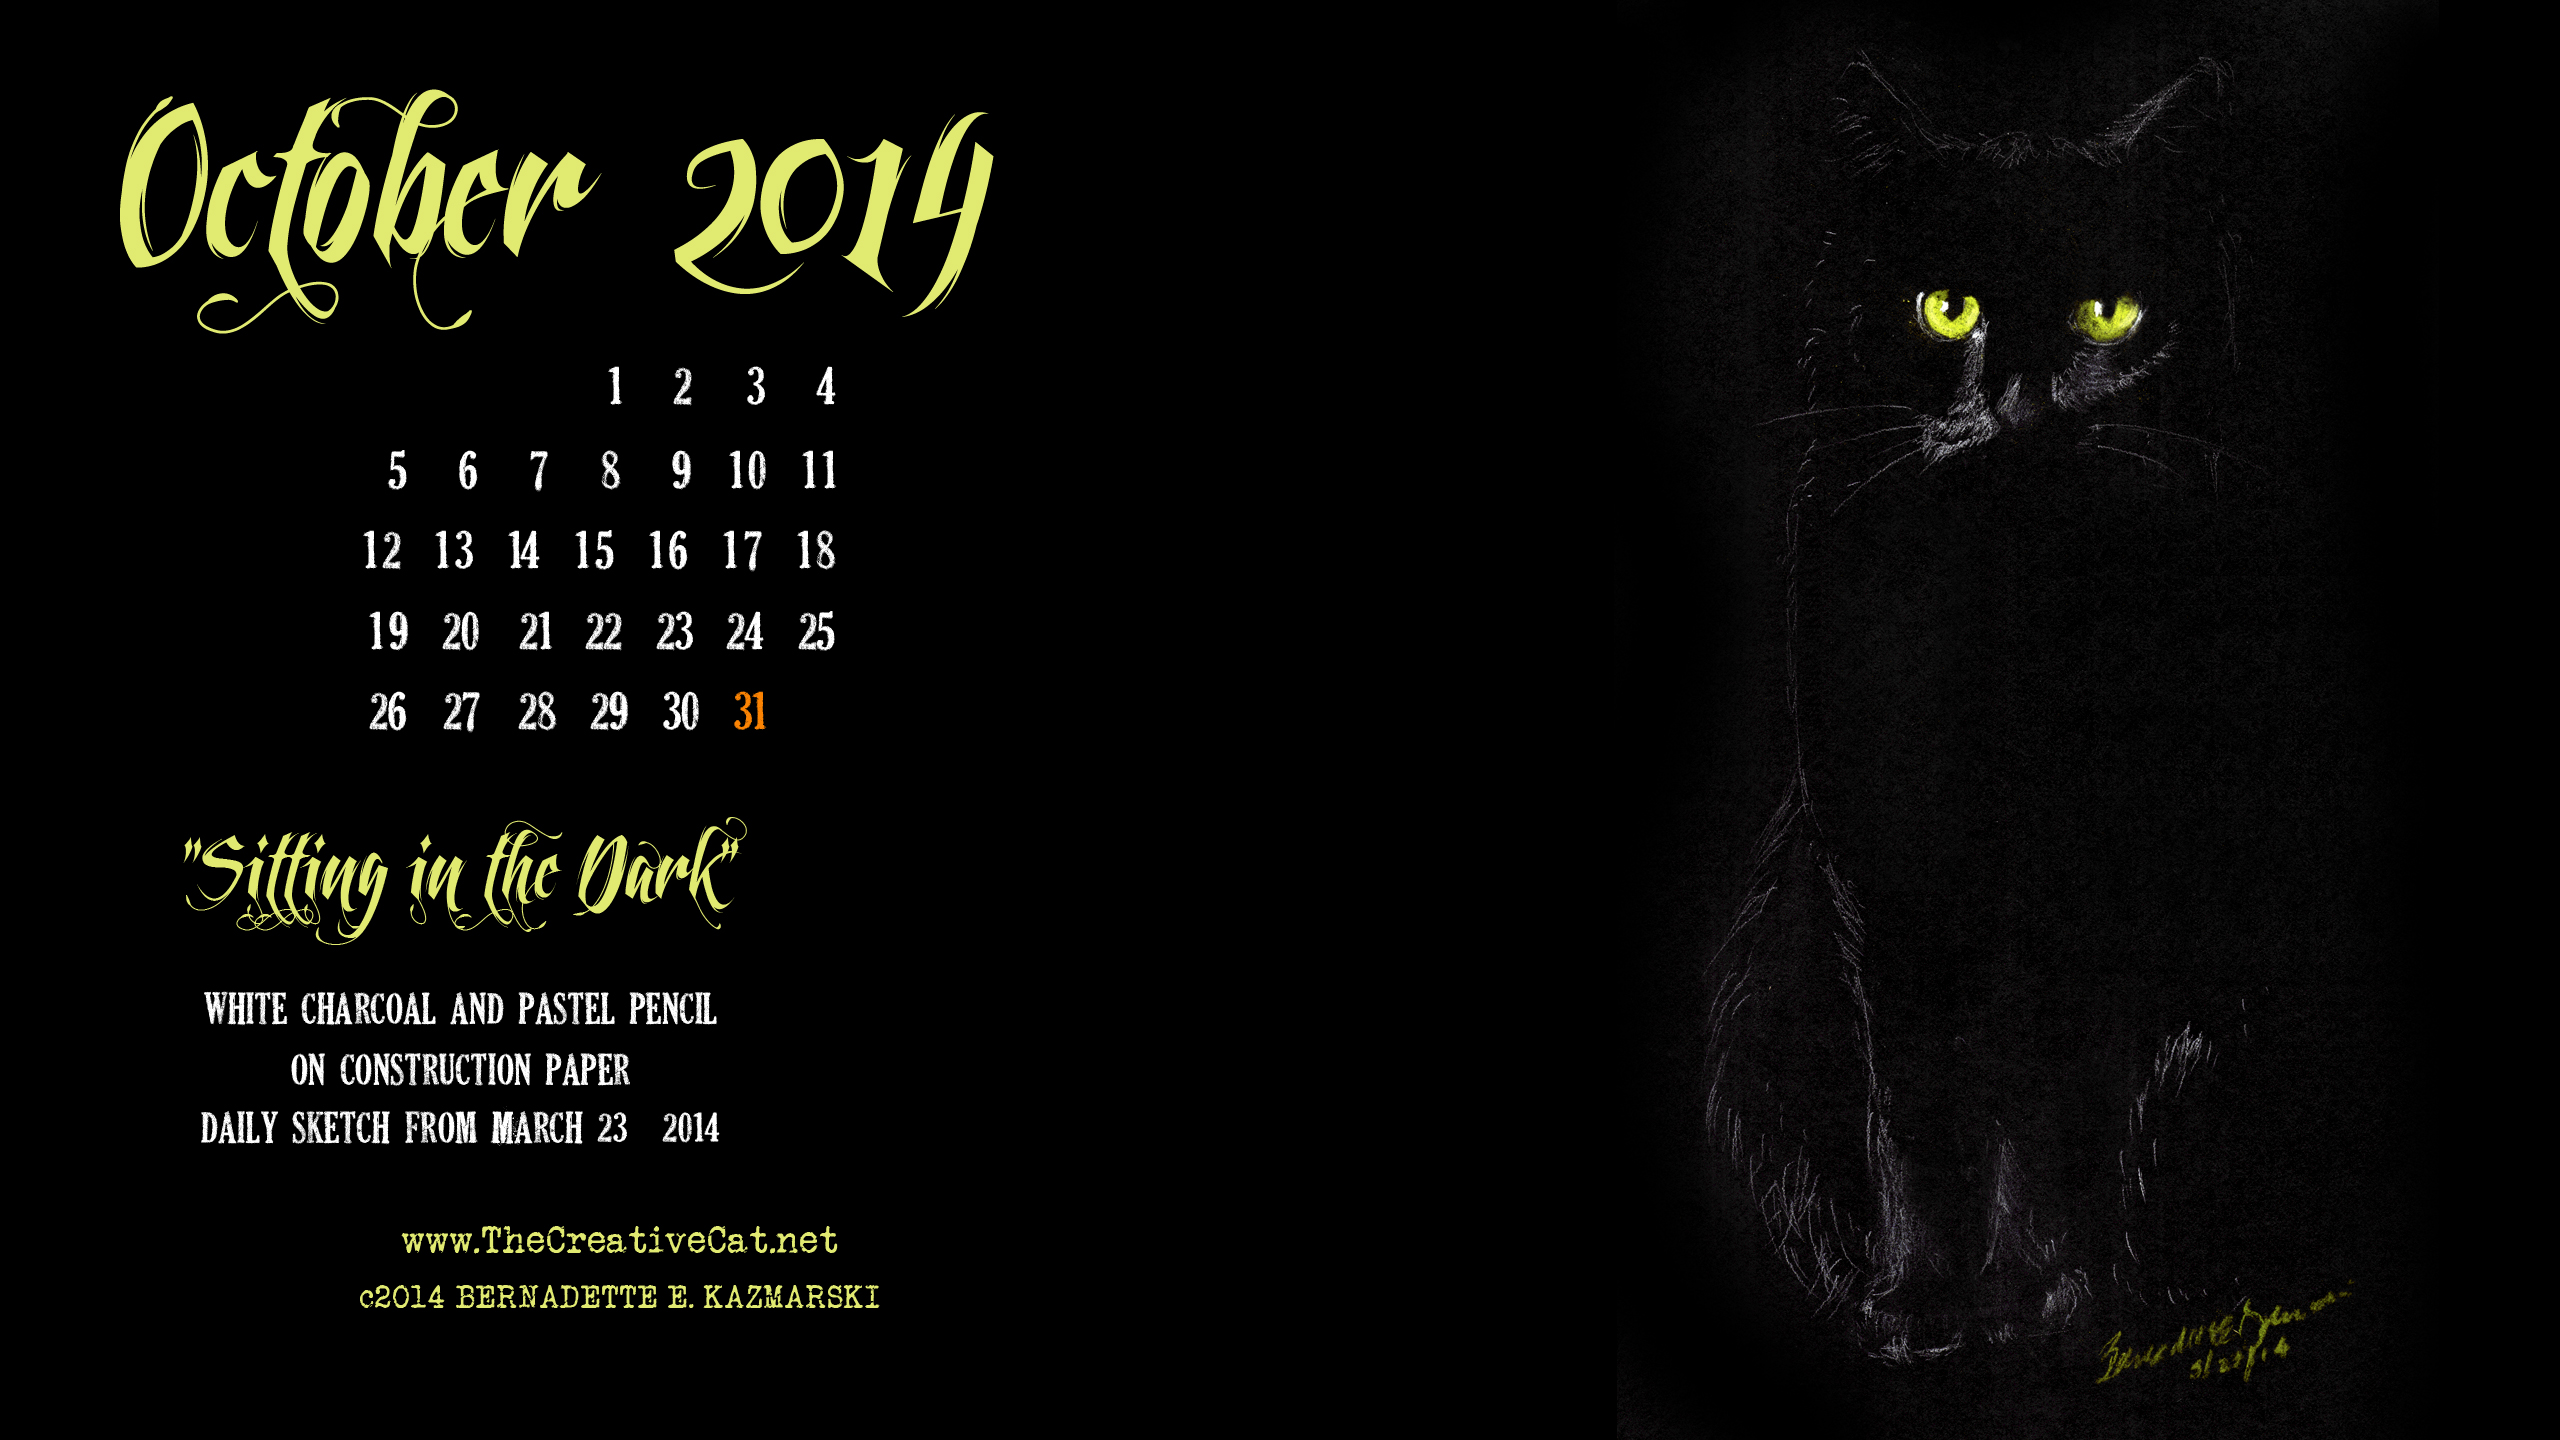 "Sitting in the Dark", 2560 x 1440 for wide and HD monitors cats desktop calendar